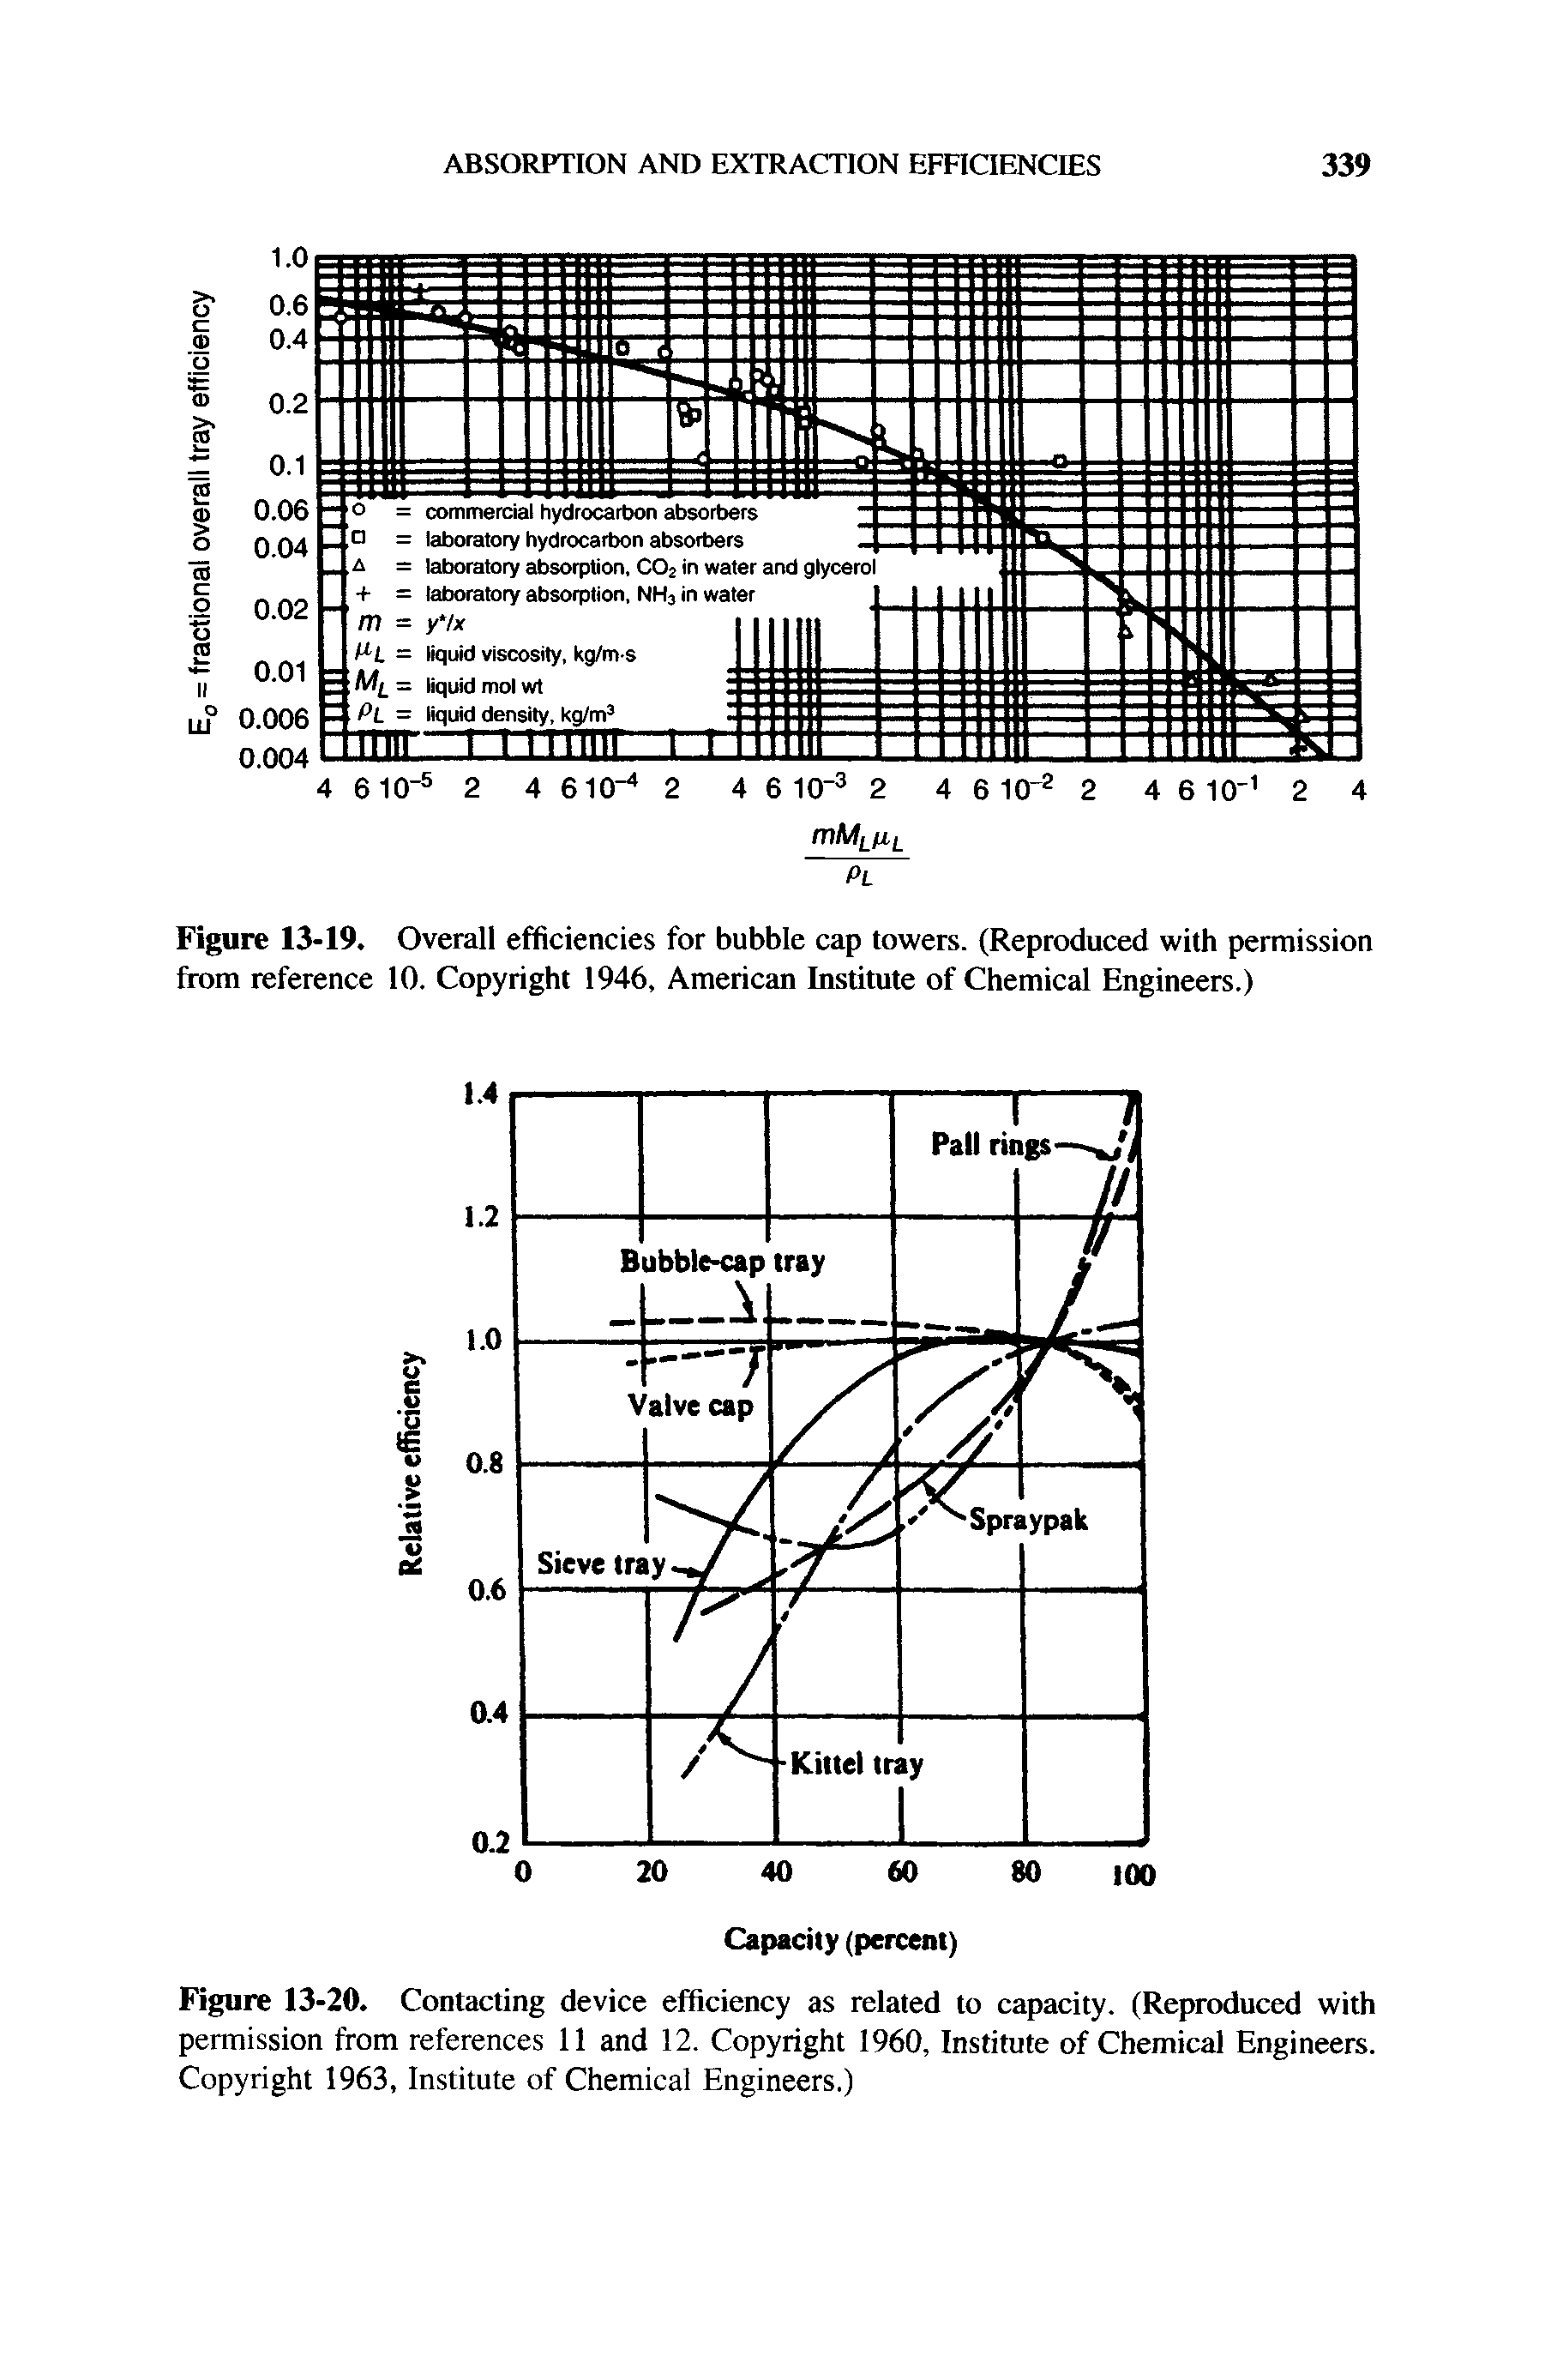 Figure 13-19. Overall efficiencies for bubble cap towers. (Reproduced with permission from reference 10. Copyright 1946, American Institute of Chemical Engineers.)...